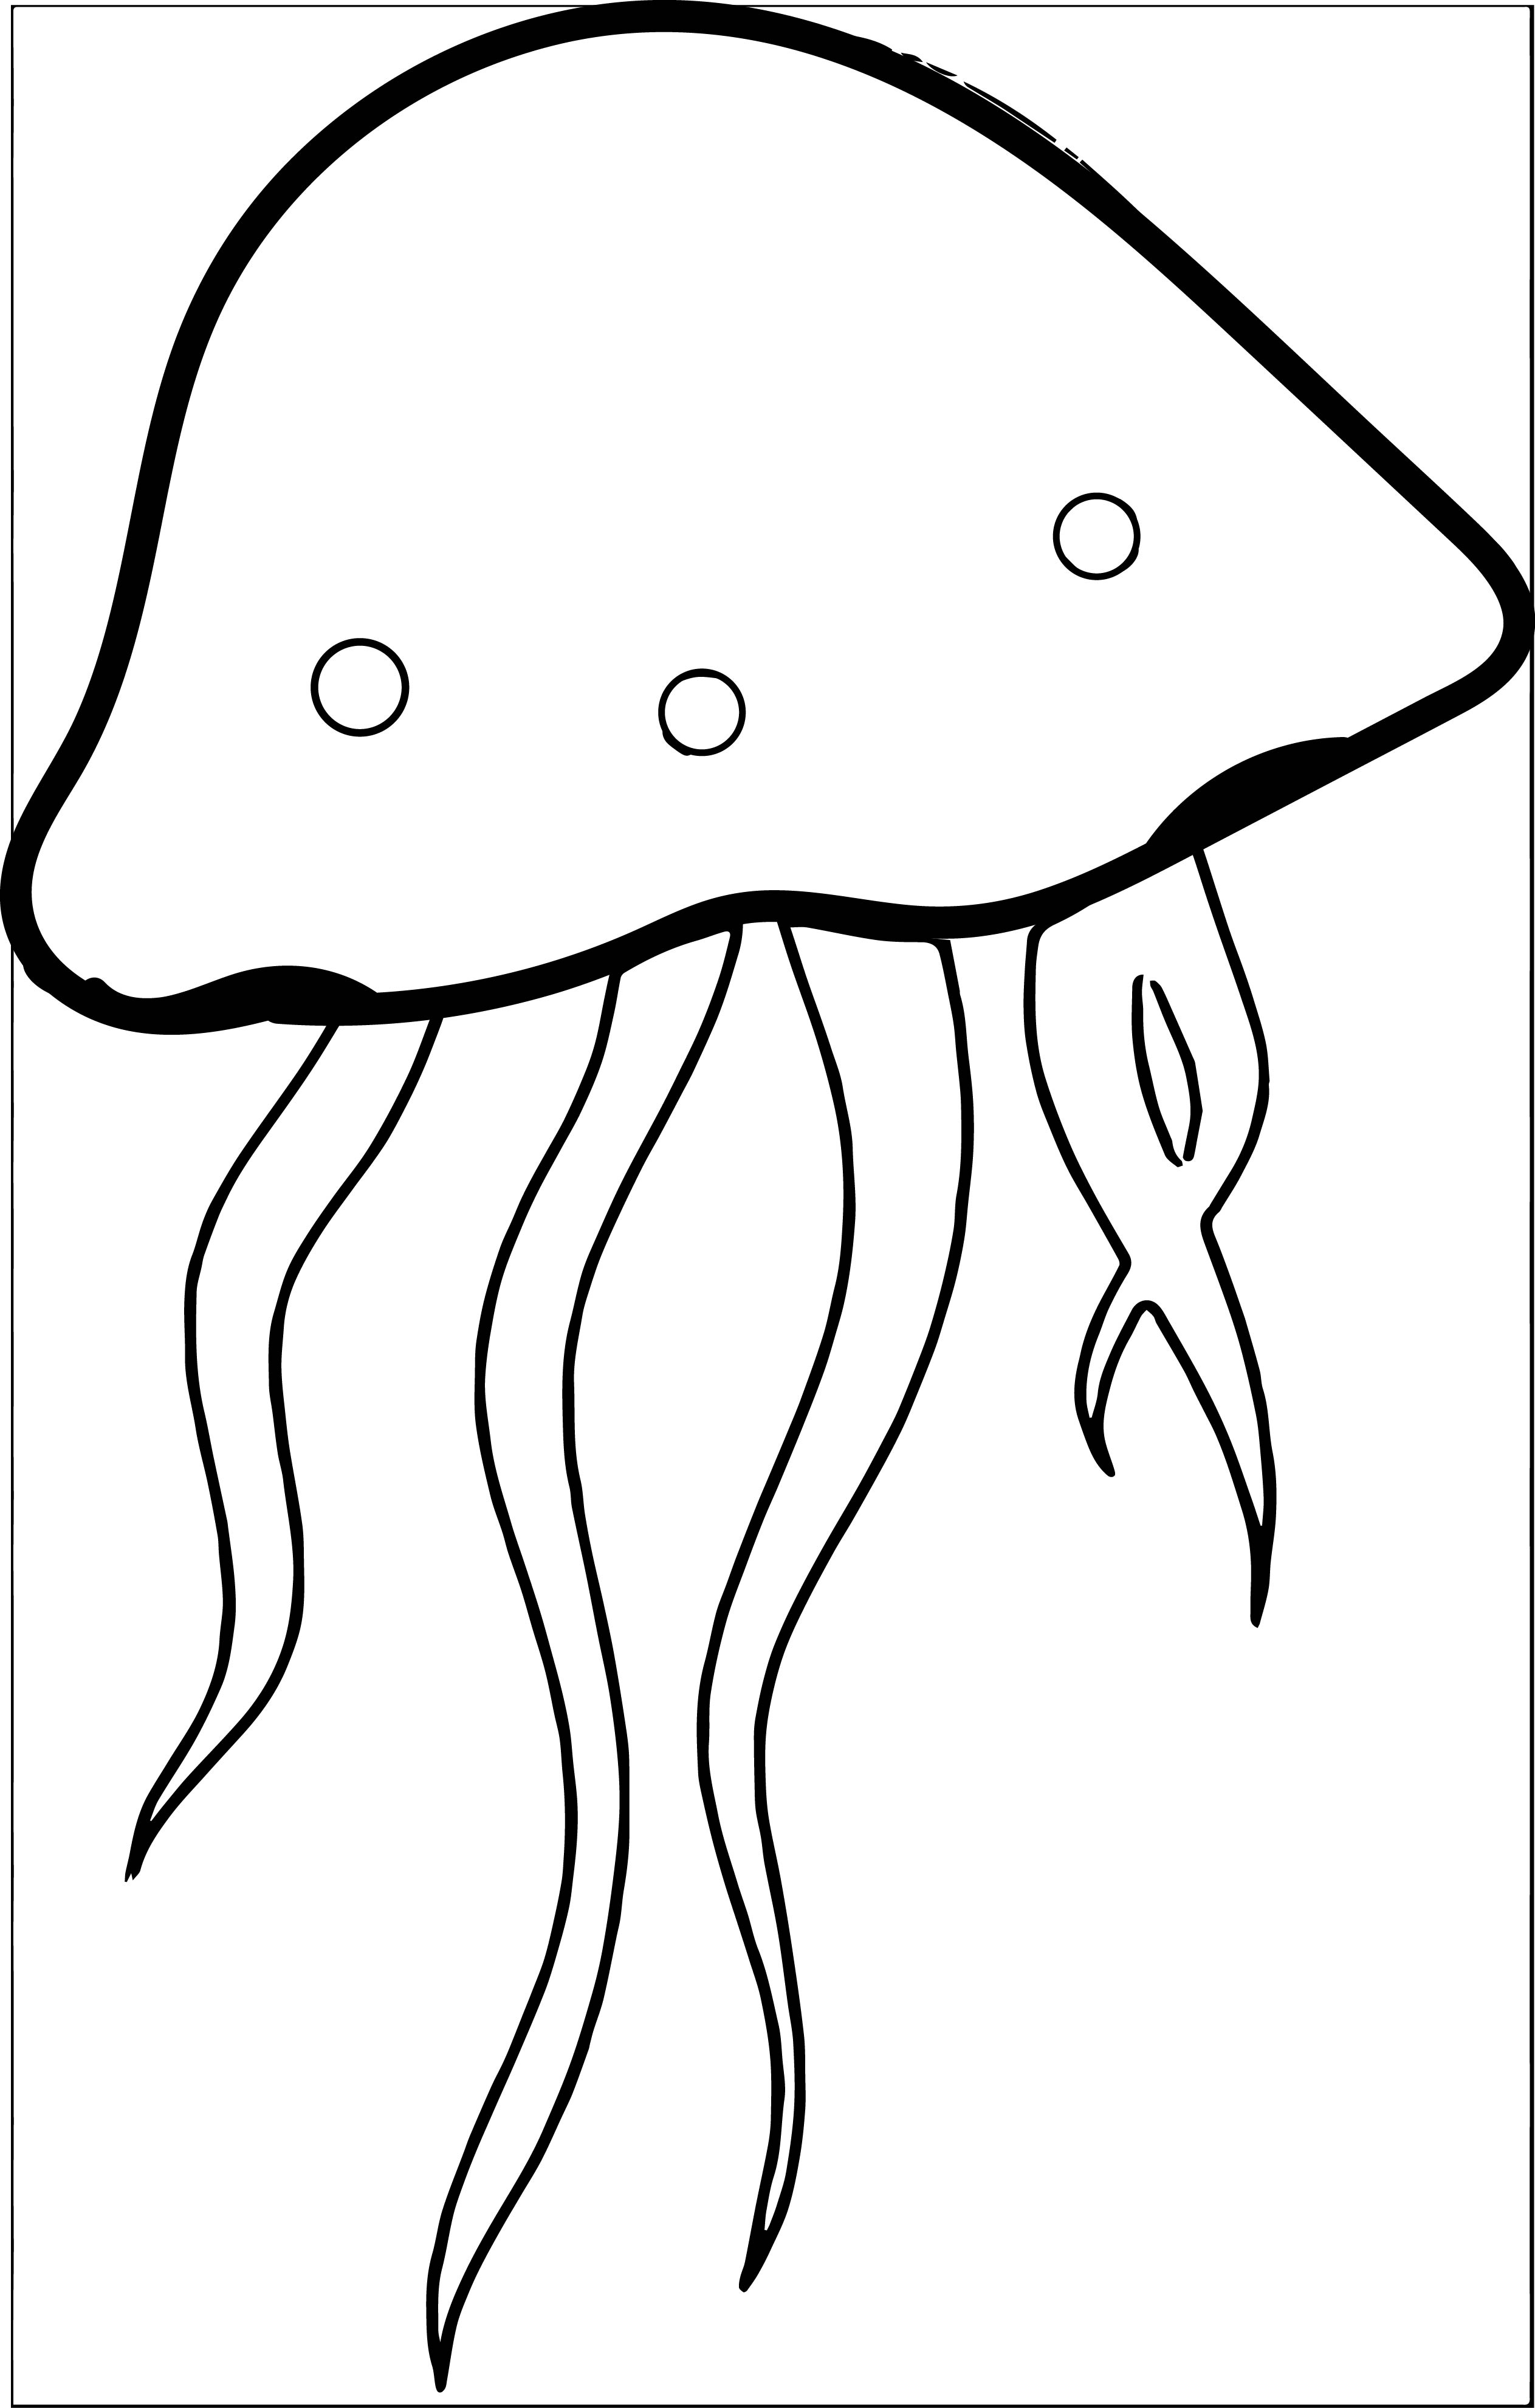 Jellyfish Clipart - 34 cliparts